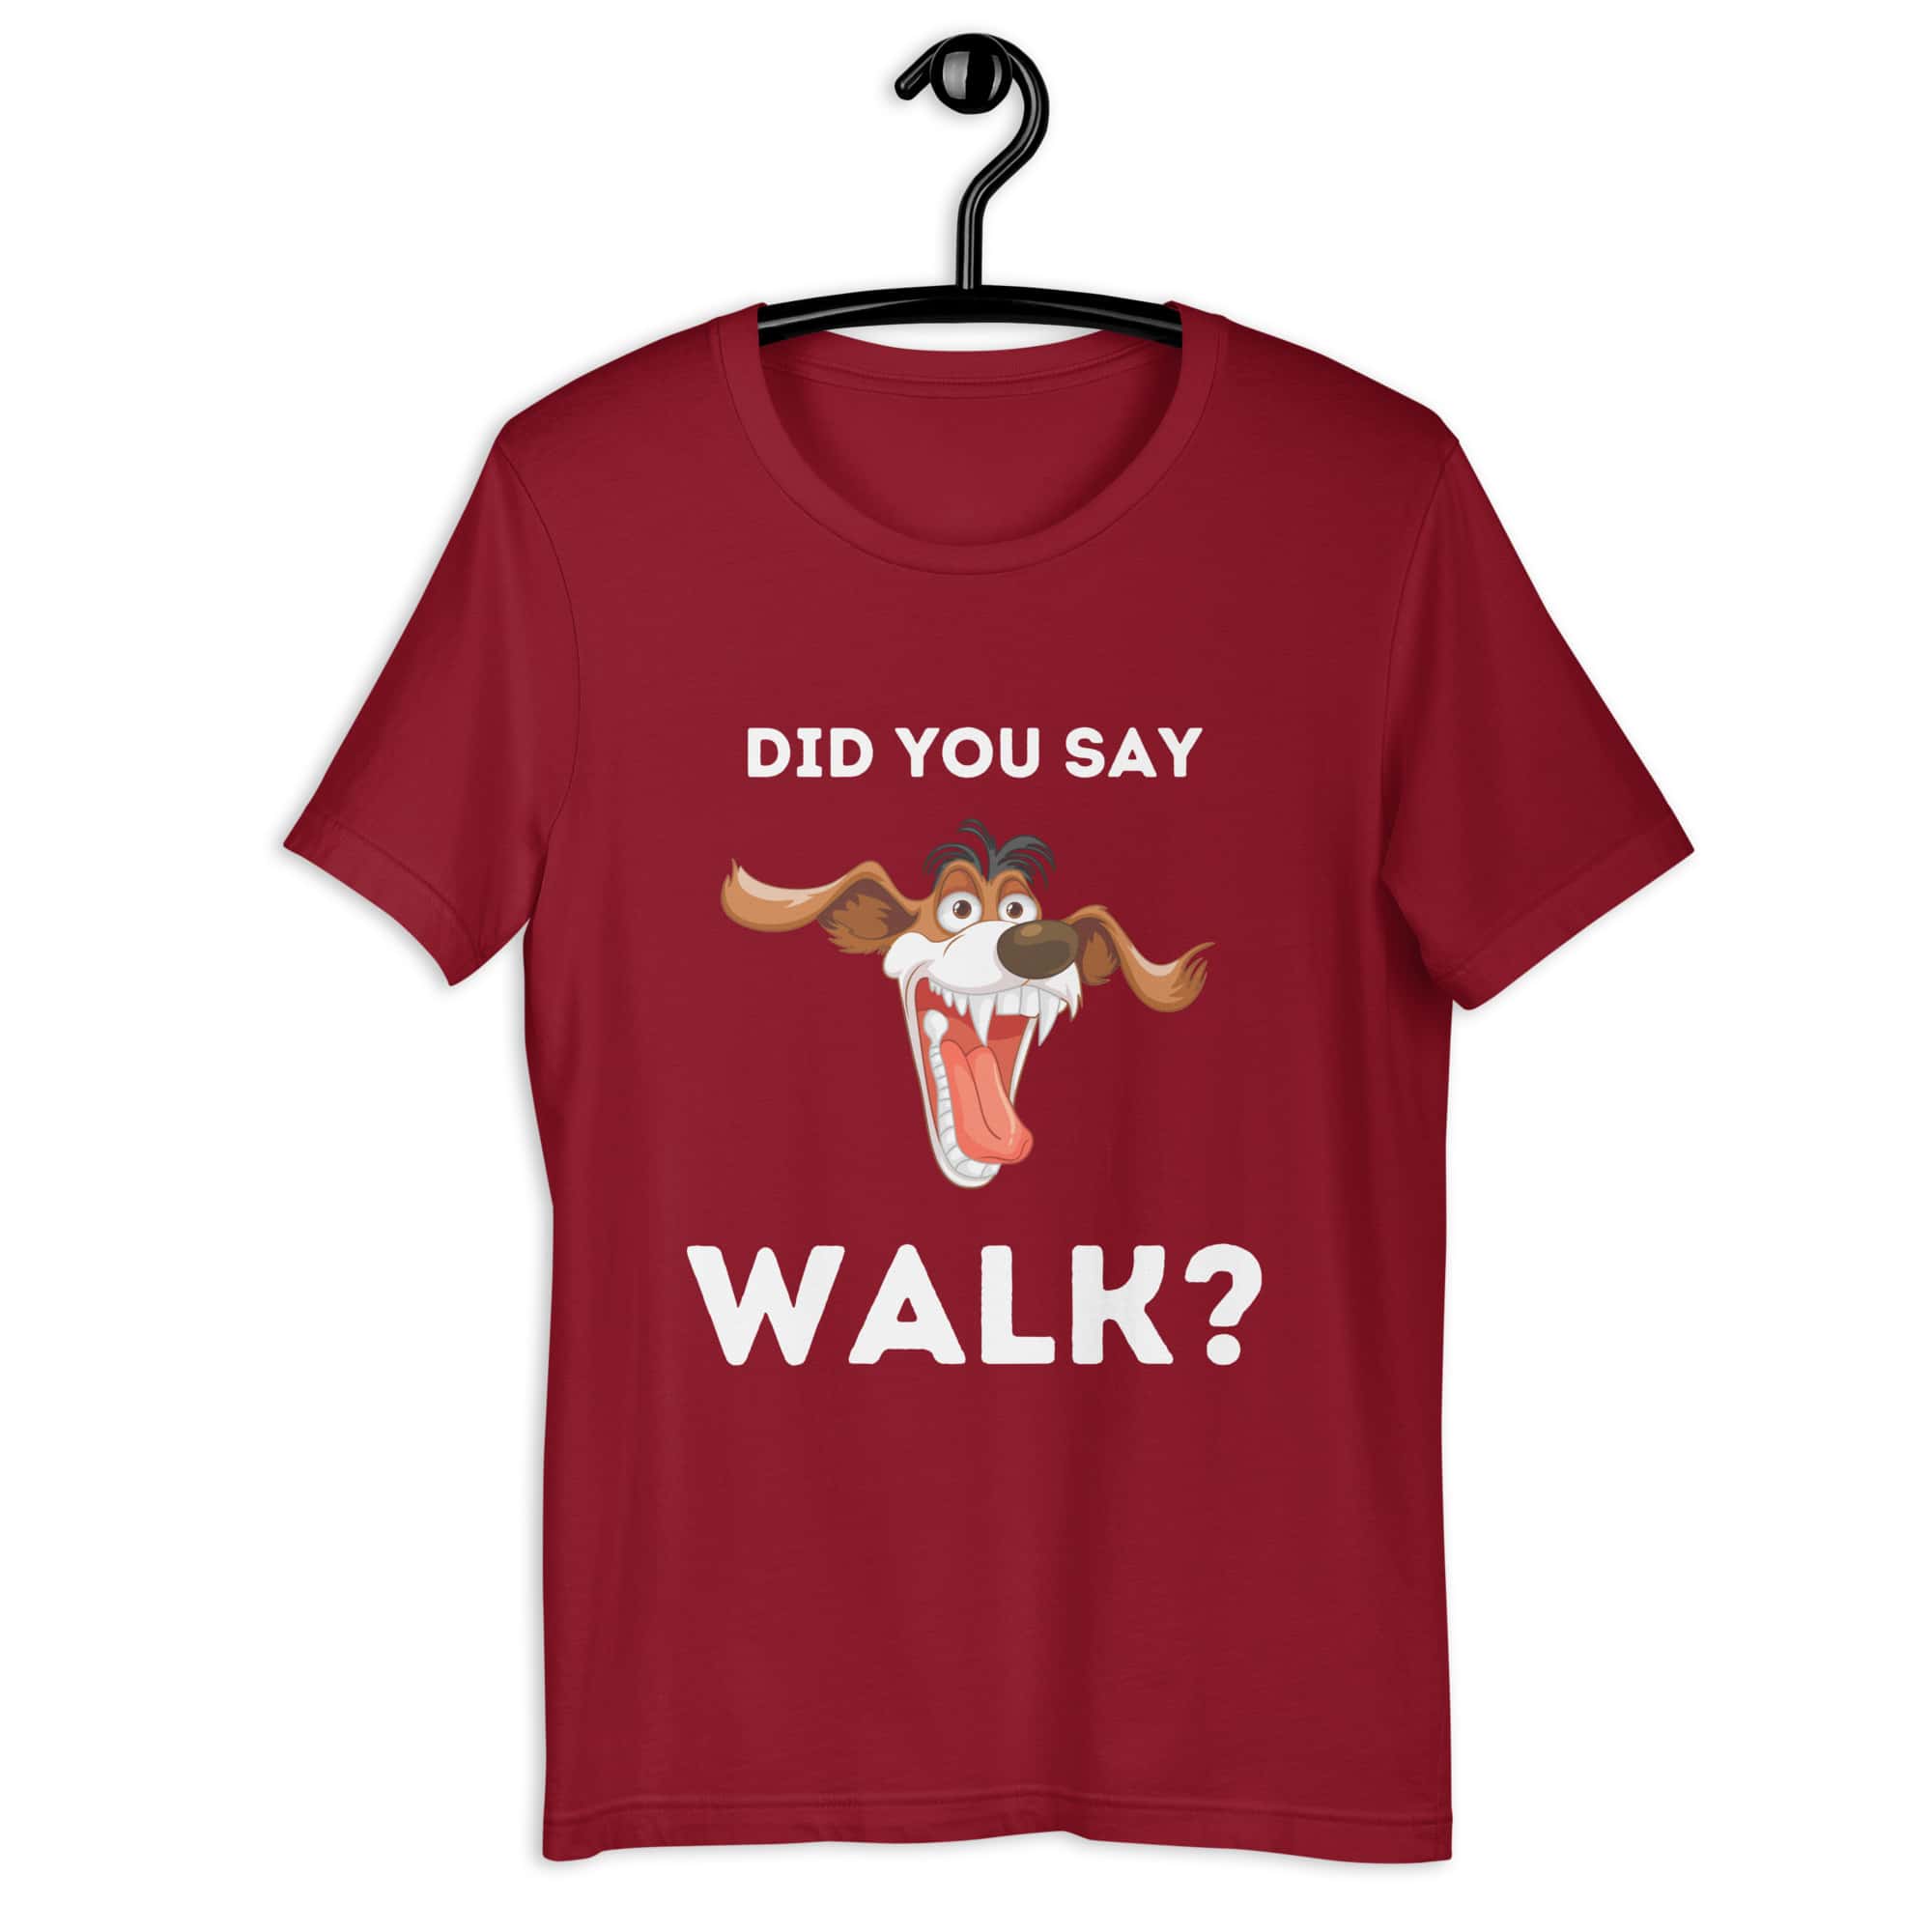 The "Funny 'Did You Say Walk?' Dog Unisex T-Shirt" captures the excitement dogs feel at the mention of a walk. Made from a comfortable, durable blend, it features a vibrant graphic that dog lovers will relate to. Available in various sizes and colors, it's perfect for casual wear, highlighting a universal moment in dog ownership with humor and style. Cardinal